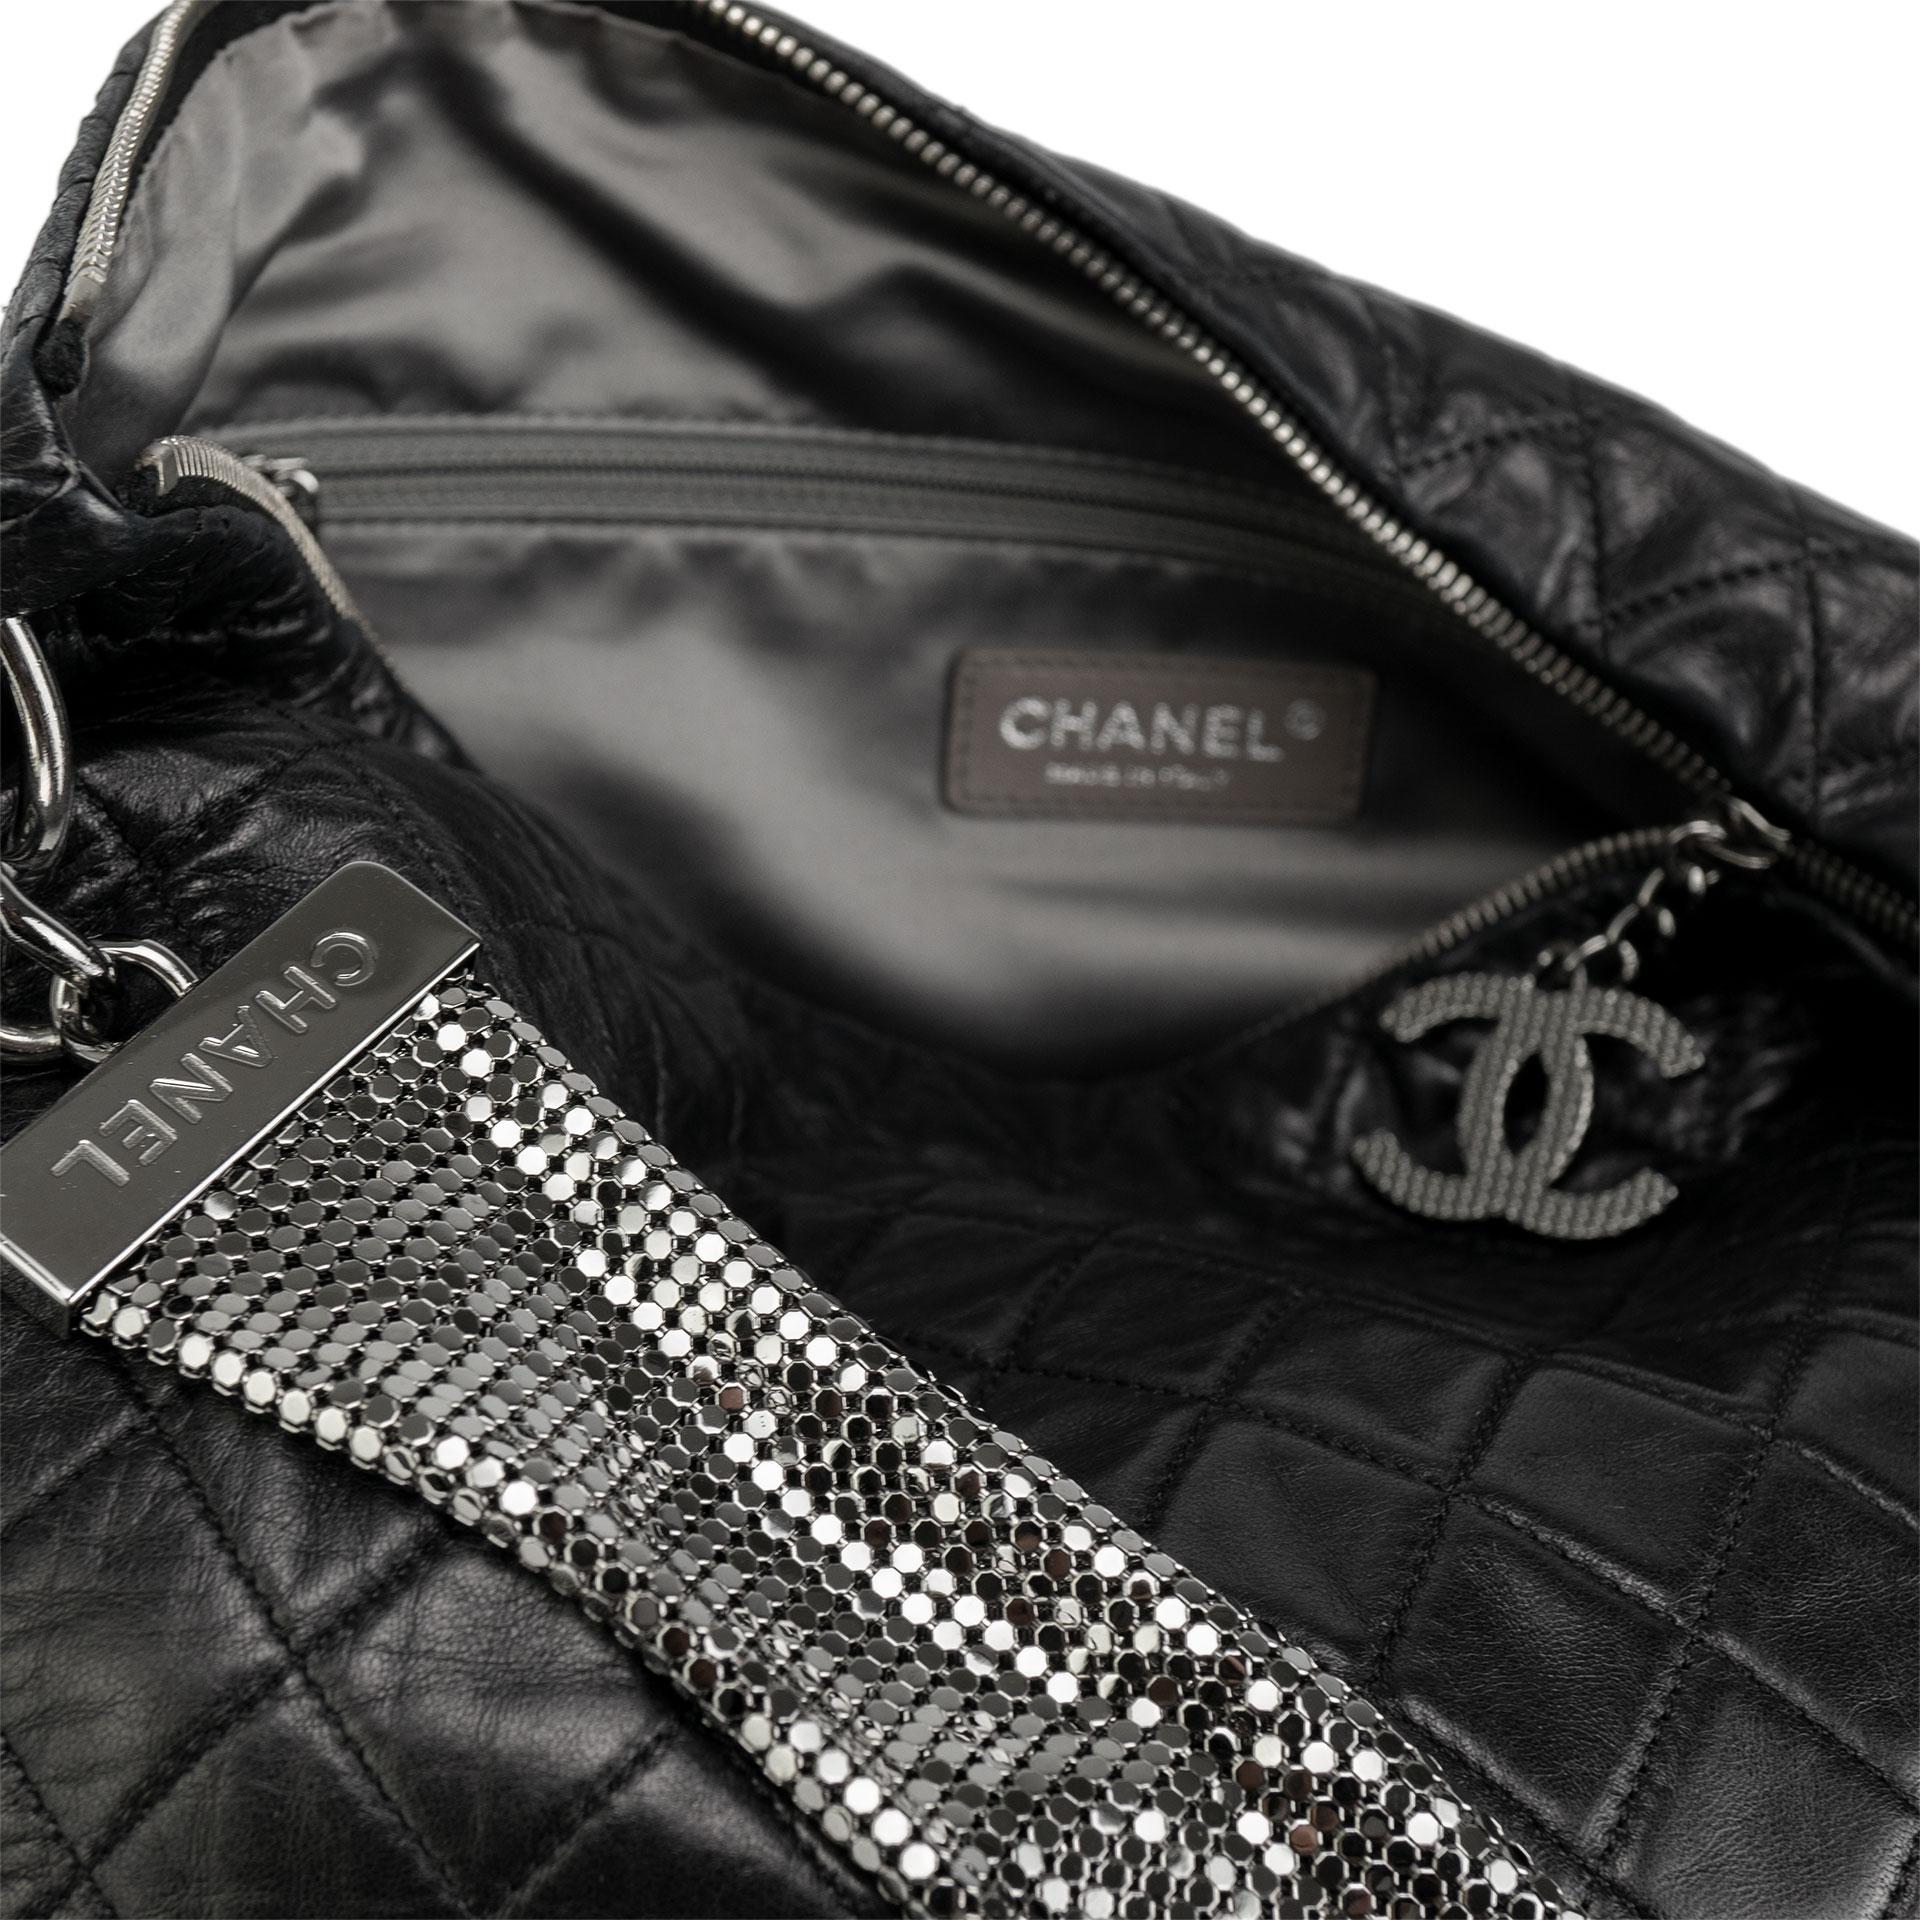 Chanel 2008 Metallic Mesh Soft Quilted Black Lambskin Leather Large Hobo Bag For Sale 10